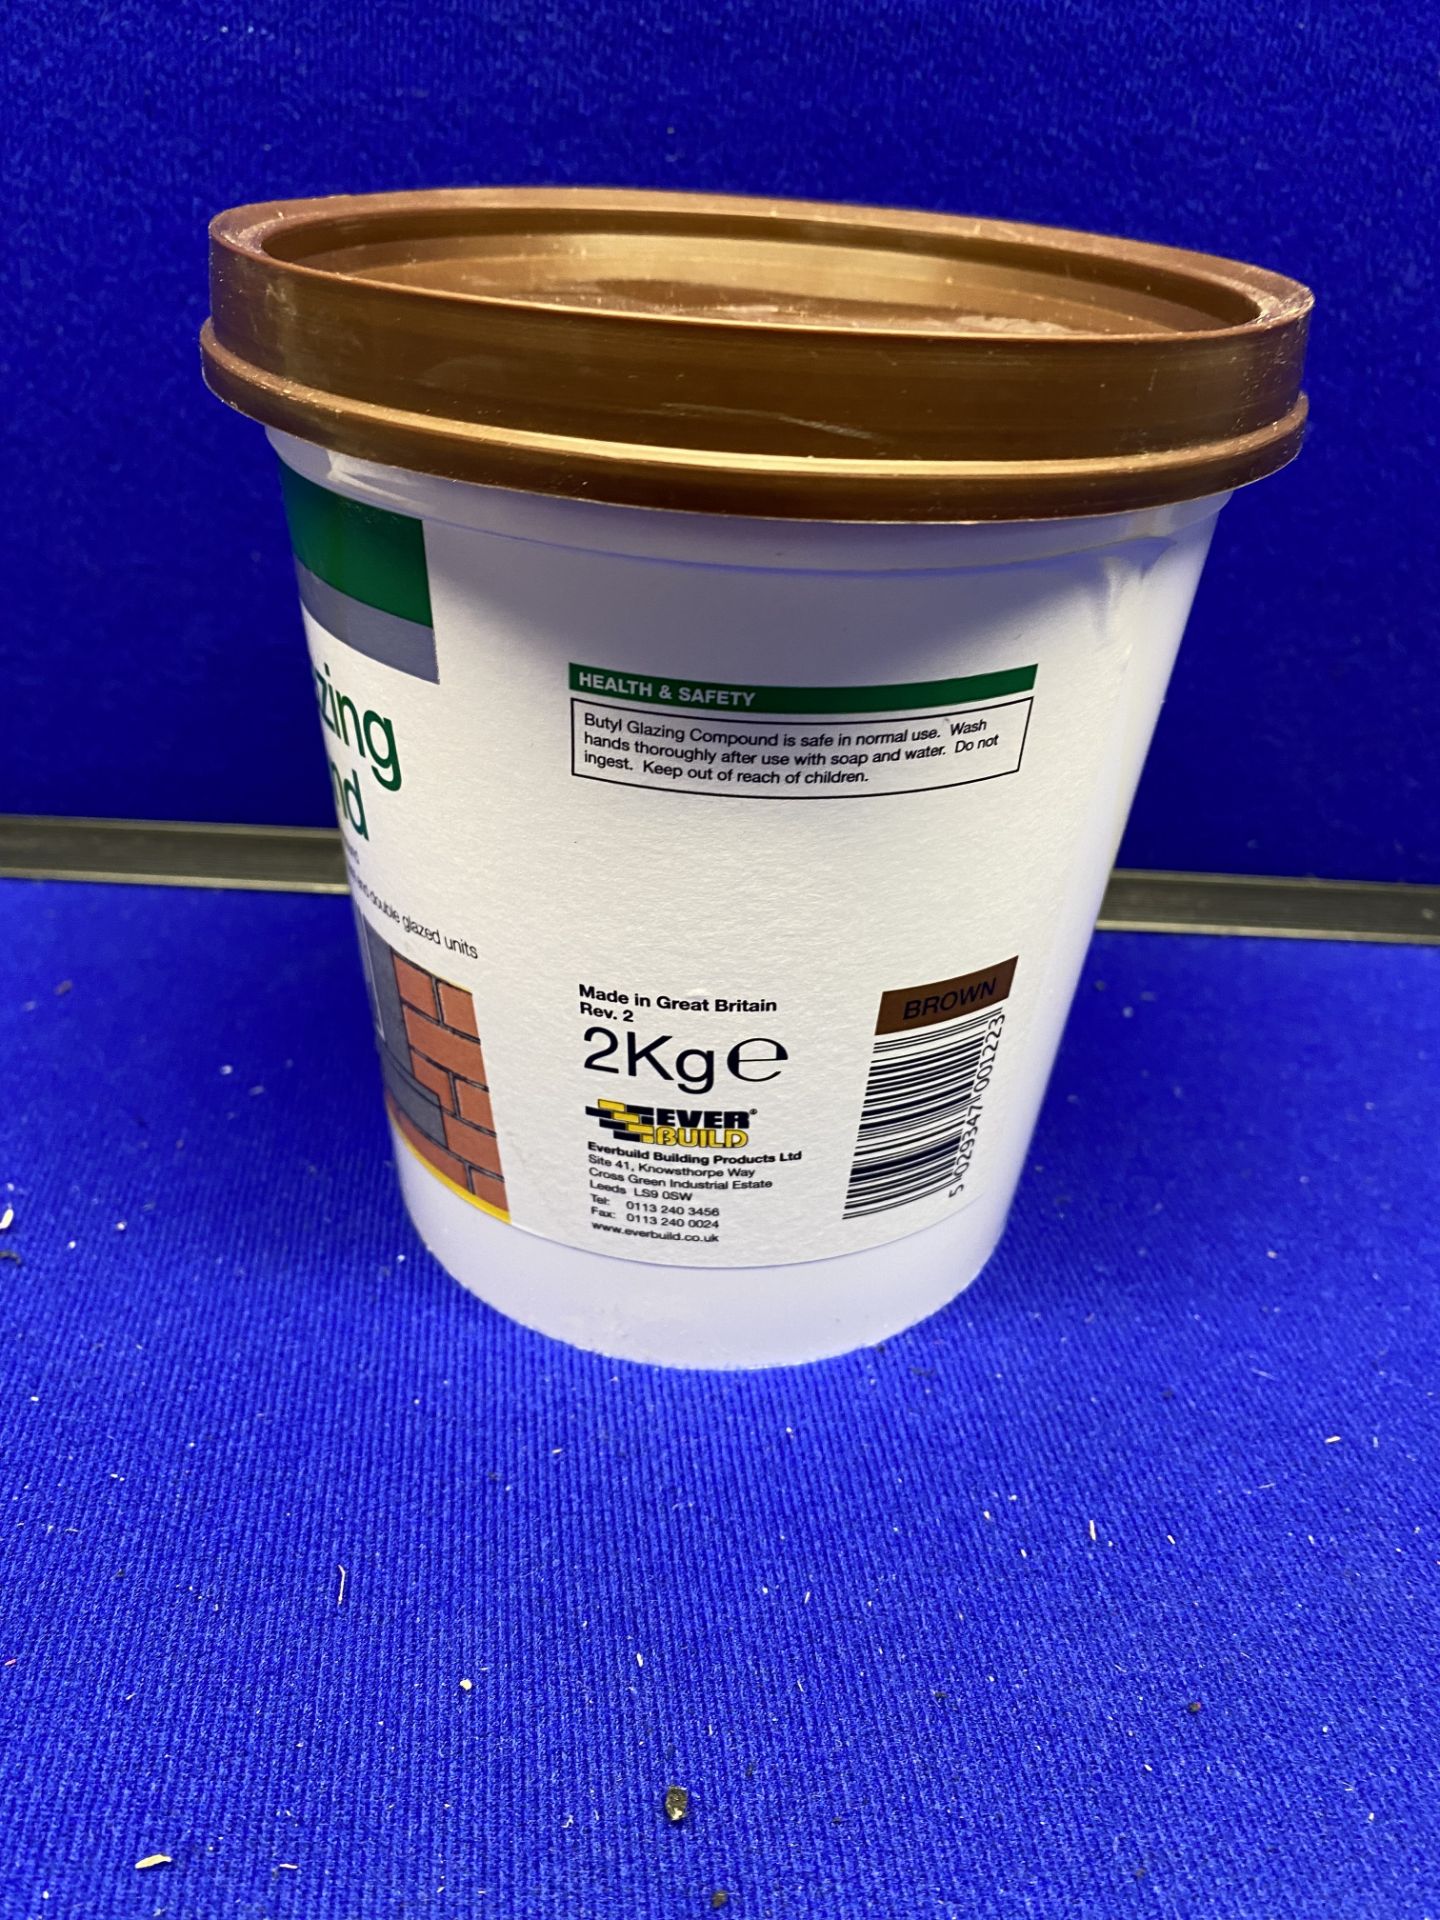 Mixed Lot Of 2kg Tubs Of Everbuild Butyl Glazing Compound & Linseed Oil Putty - See Description - Image 3 of 5